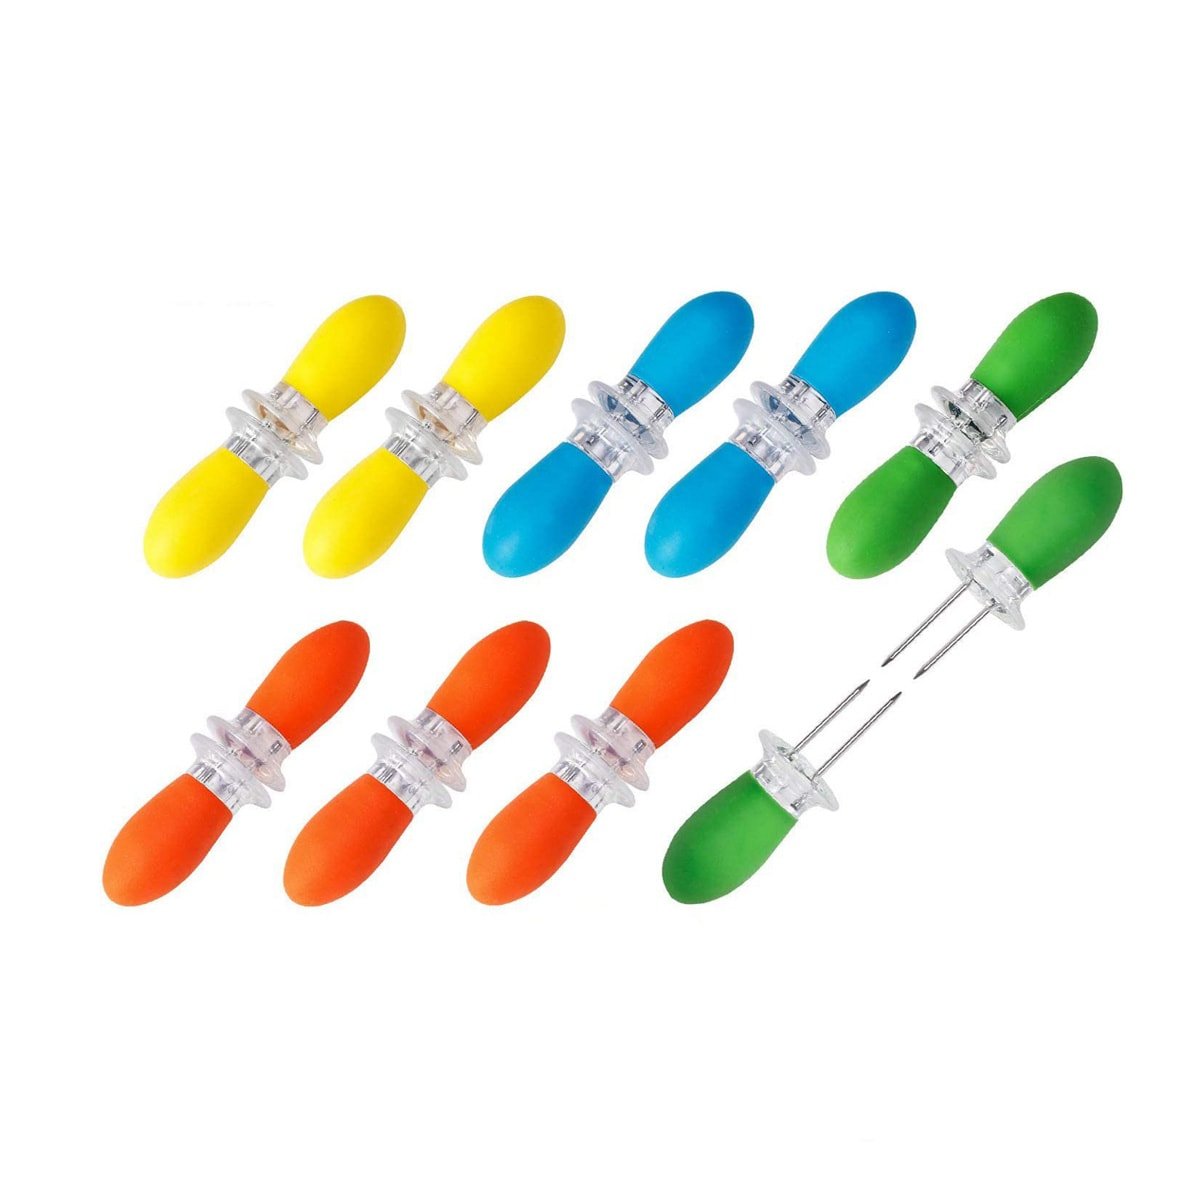 A set of corn on the cob holders in various colors.